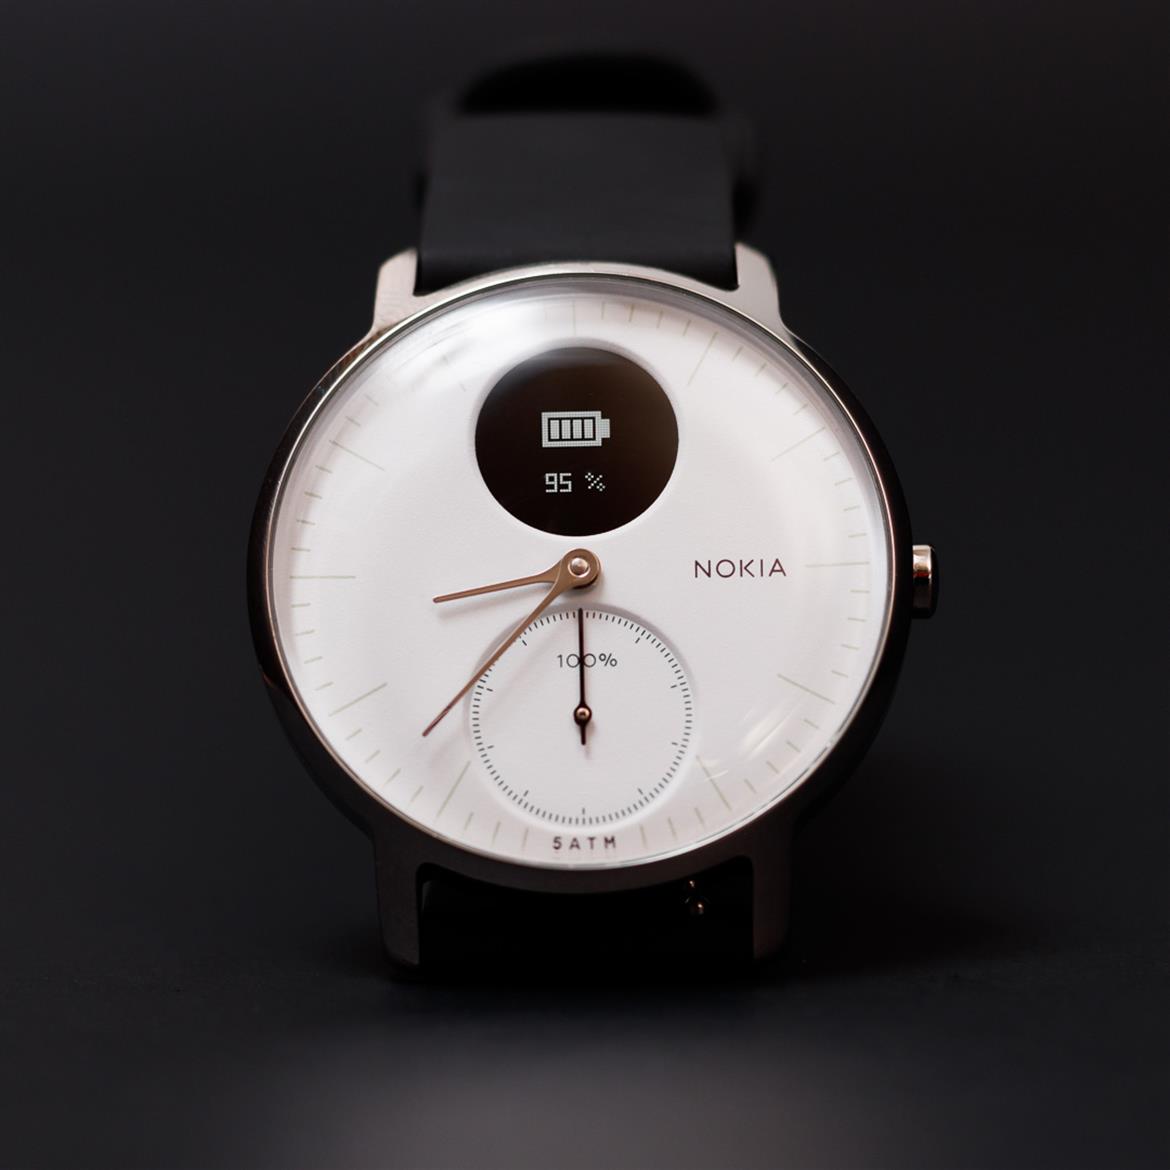 Nokia Steel HR Review: Hybrid Smartwatch With Classic Timepiece Flair